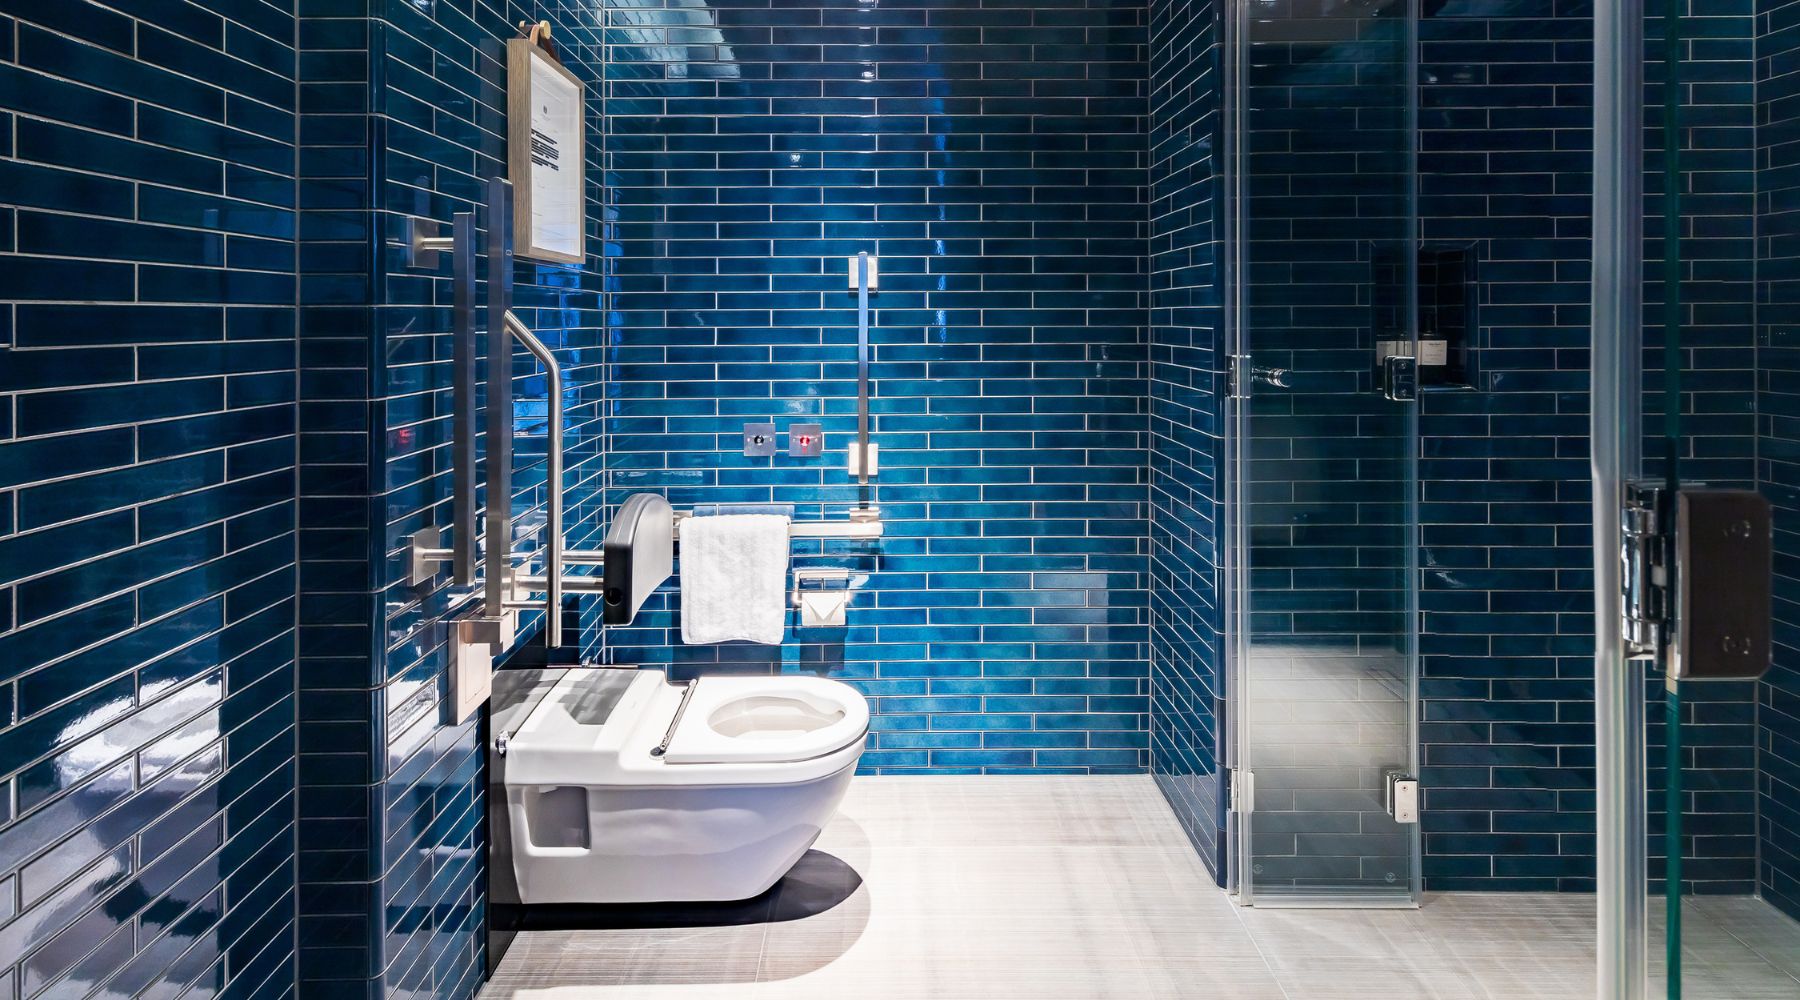 Accessible bathroom at The Londoner including grab rails and level-access shower